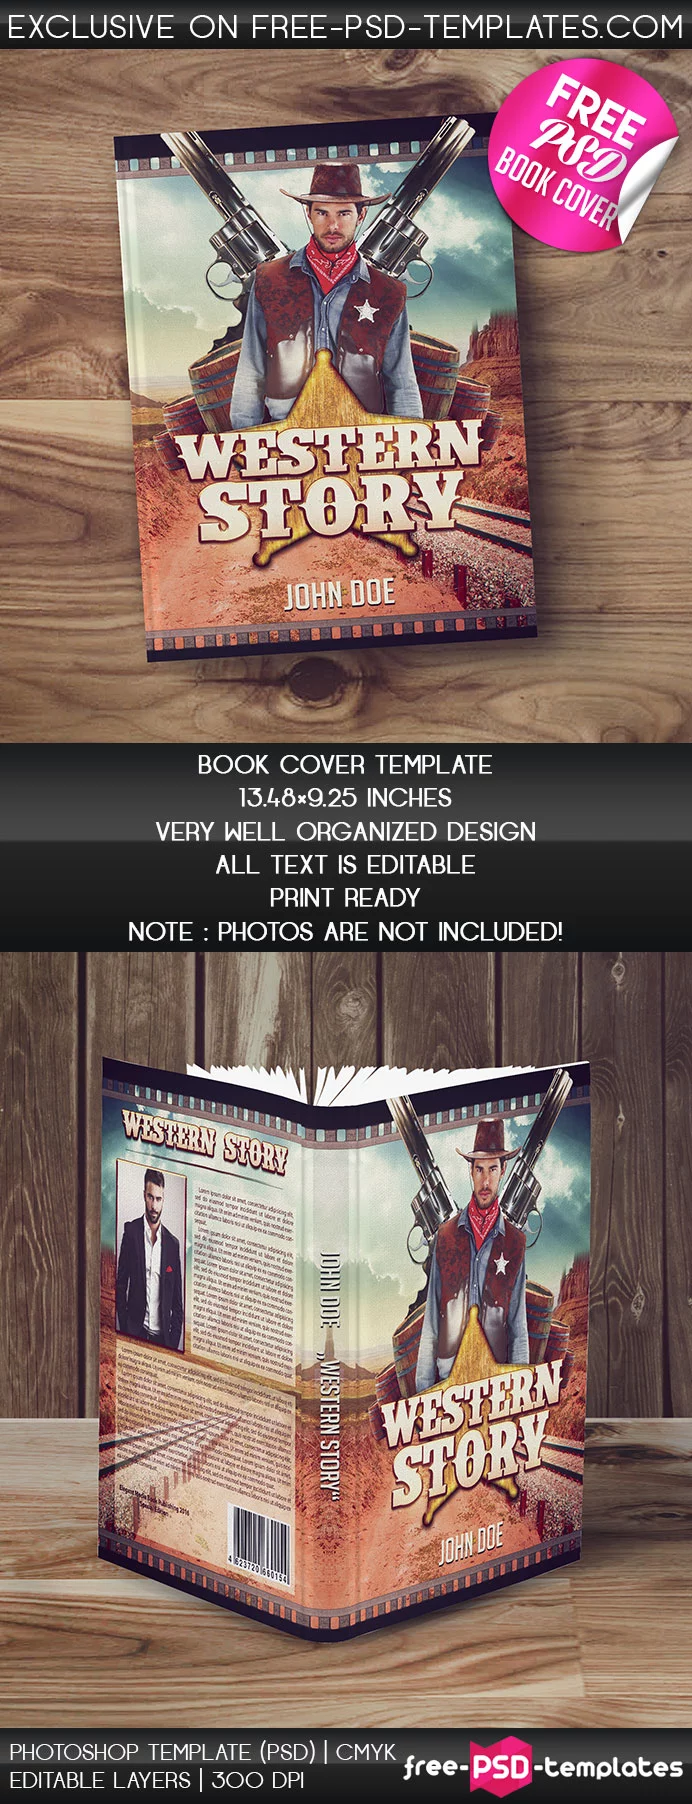 Preview_Book_Cover_Template